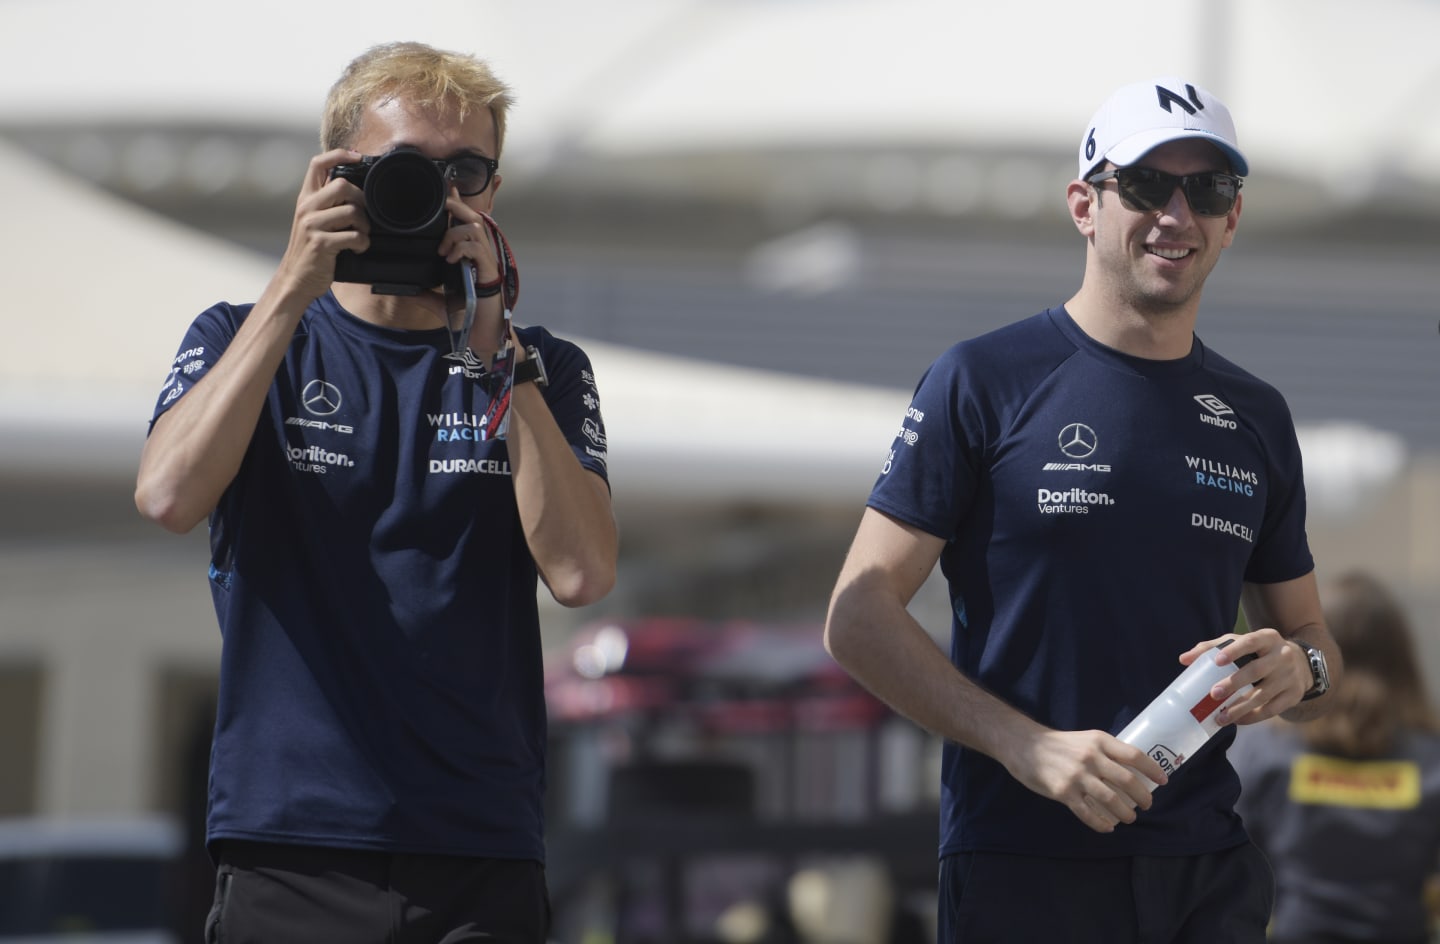 ABU DHABI, UNITED ARAB EMIRATES - NOVEMBER 18: Alexander Albon of Thailand and Williams and Nicholas Latifi of Canada and Williams walk in the paddock prior to practice ahead of the F1 Grand Prix of Abu Dhabi at Yas Marina Circuit on November 18, 2022 in Abu Dhabi, United Arab Emirates. (Photo by Rudy Carezzevoli/Getty Images)